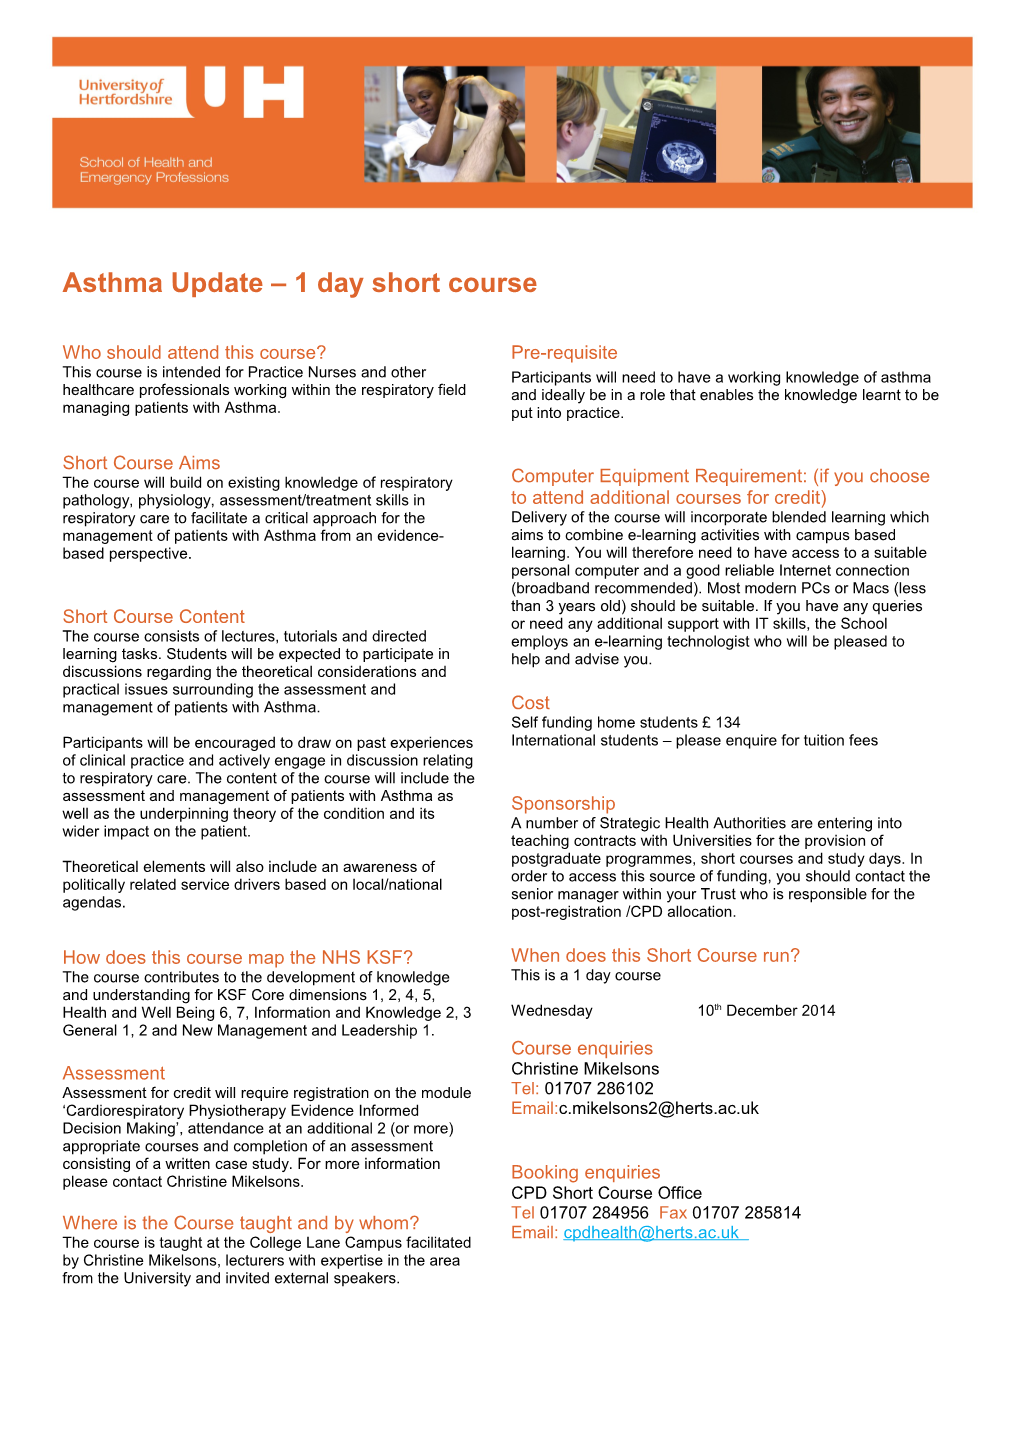 Asthma Update 1 Day Short Course